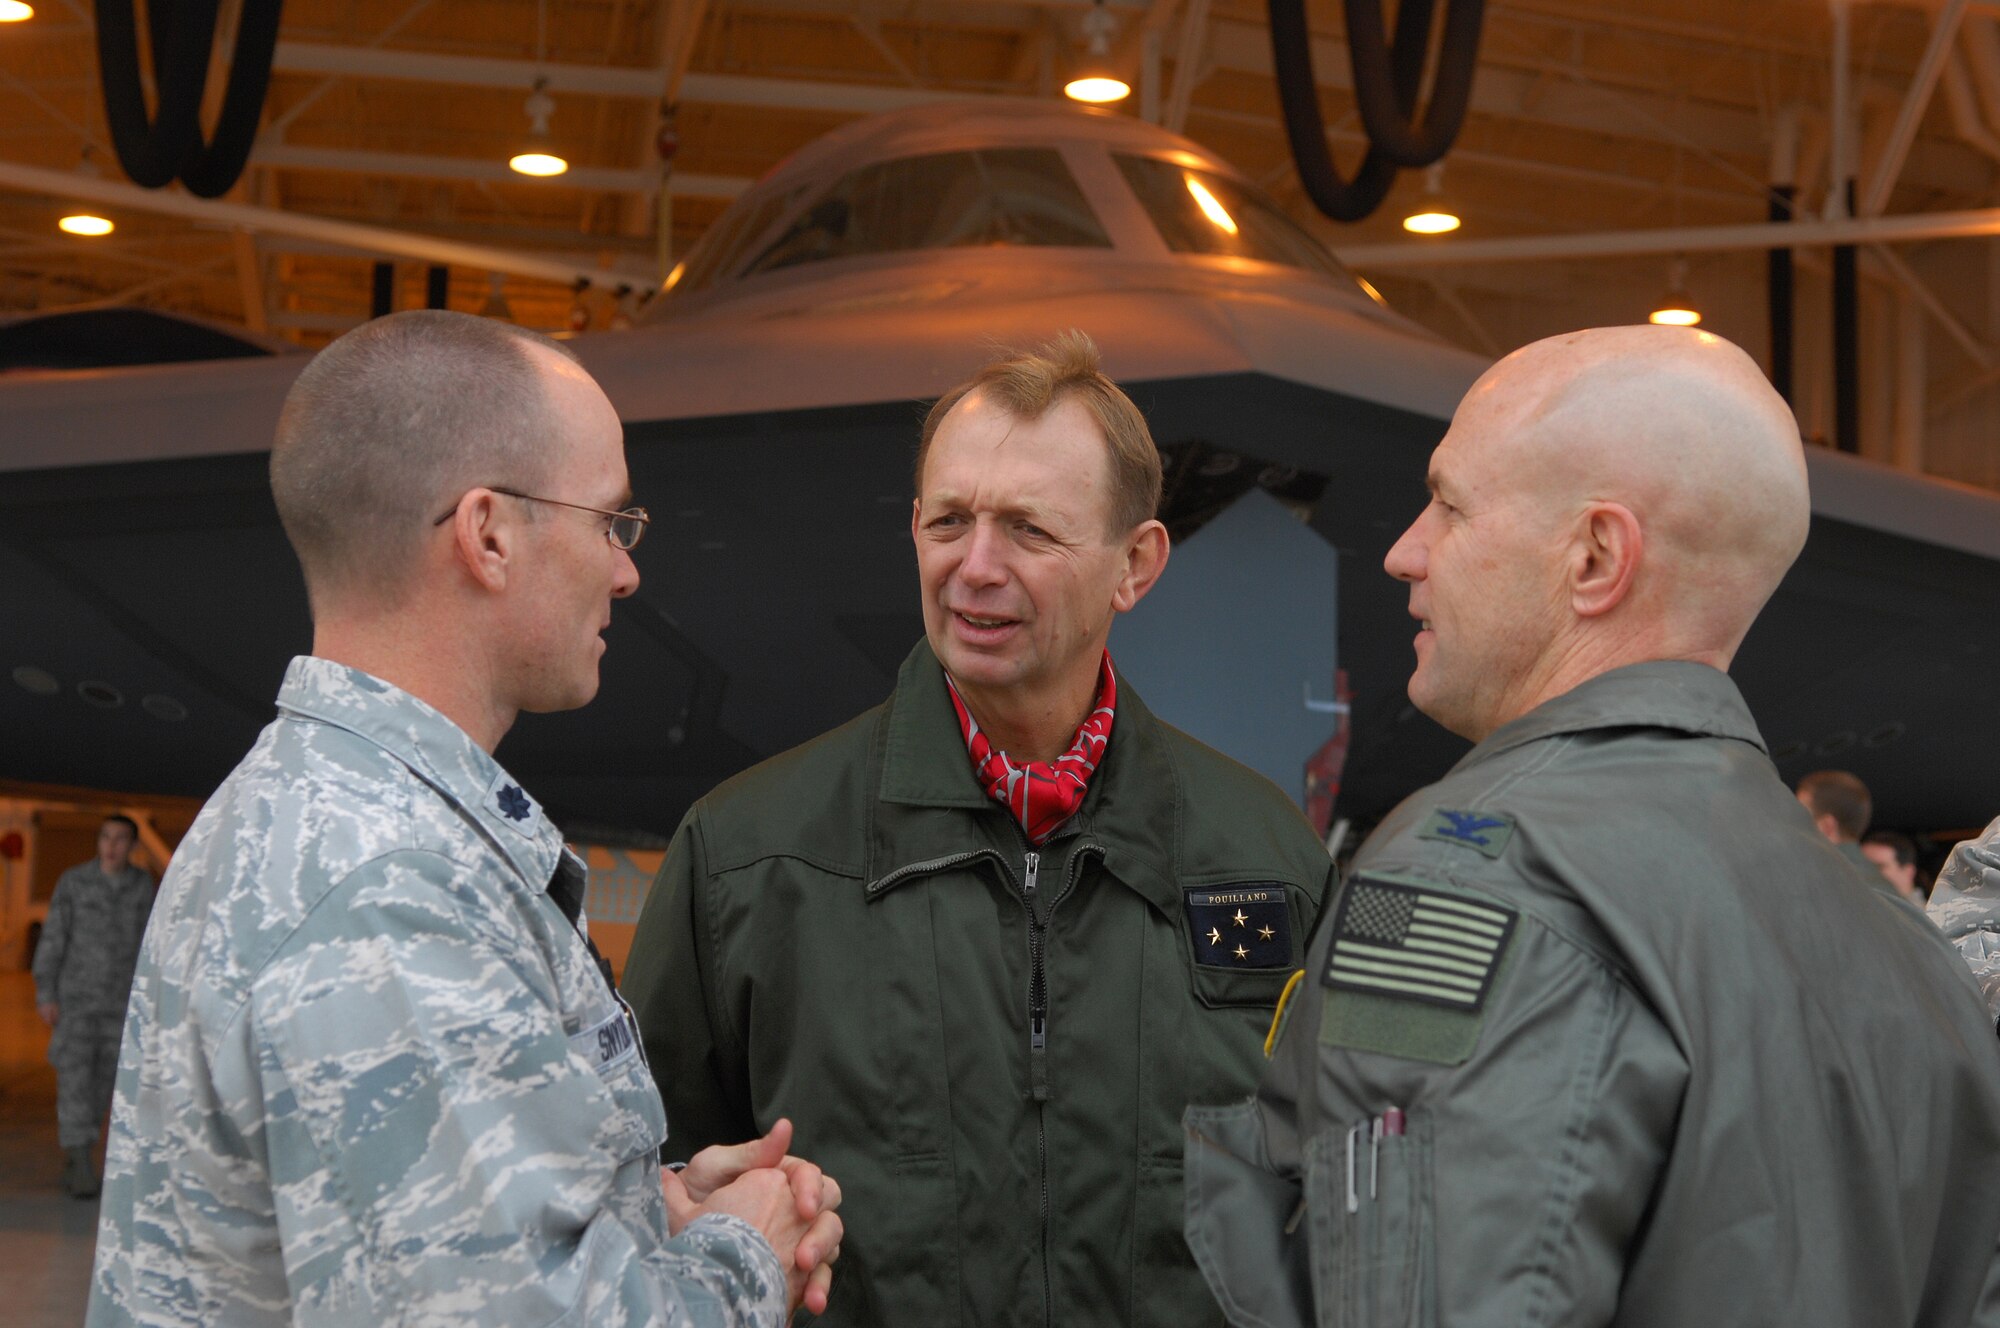 BARKSDALE AIR FORCE BASE, La. -- Lt. Col. Matthew Synder (left), 509th Maintenance Operations Squadron commander from Whiteman Air Force Base, Mo. and Col. Gregory Smith, Air Force Global Strike Command Requirements and Policy deputy director, discuss the maintenance mission for the B-2 bomber with Lt. Gen. Paul Fouilland, (center), commander-in-chief, French Strategic Air Forces, during his recent visit to AFGSC at Barksdale AFB, La. Nov. 14 – 18.  (U.S. Air Force photo/Master Sgt. Corey A. Clements)